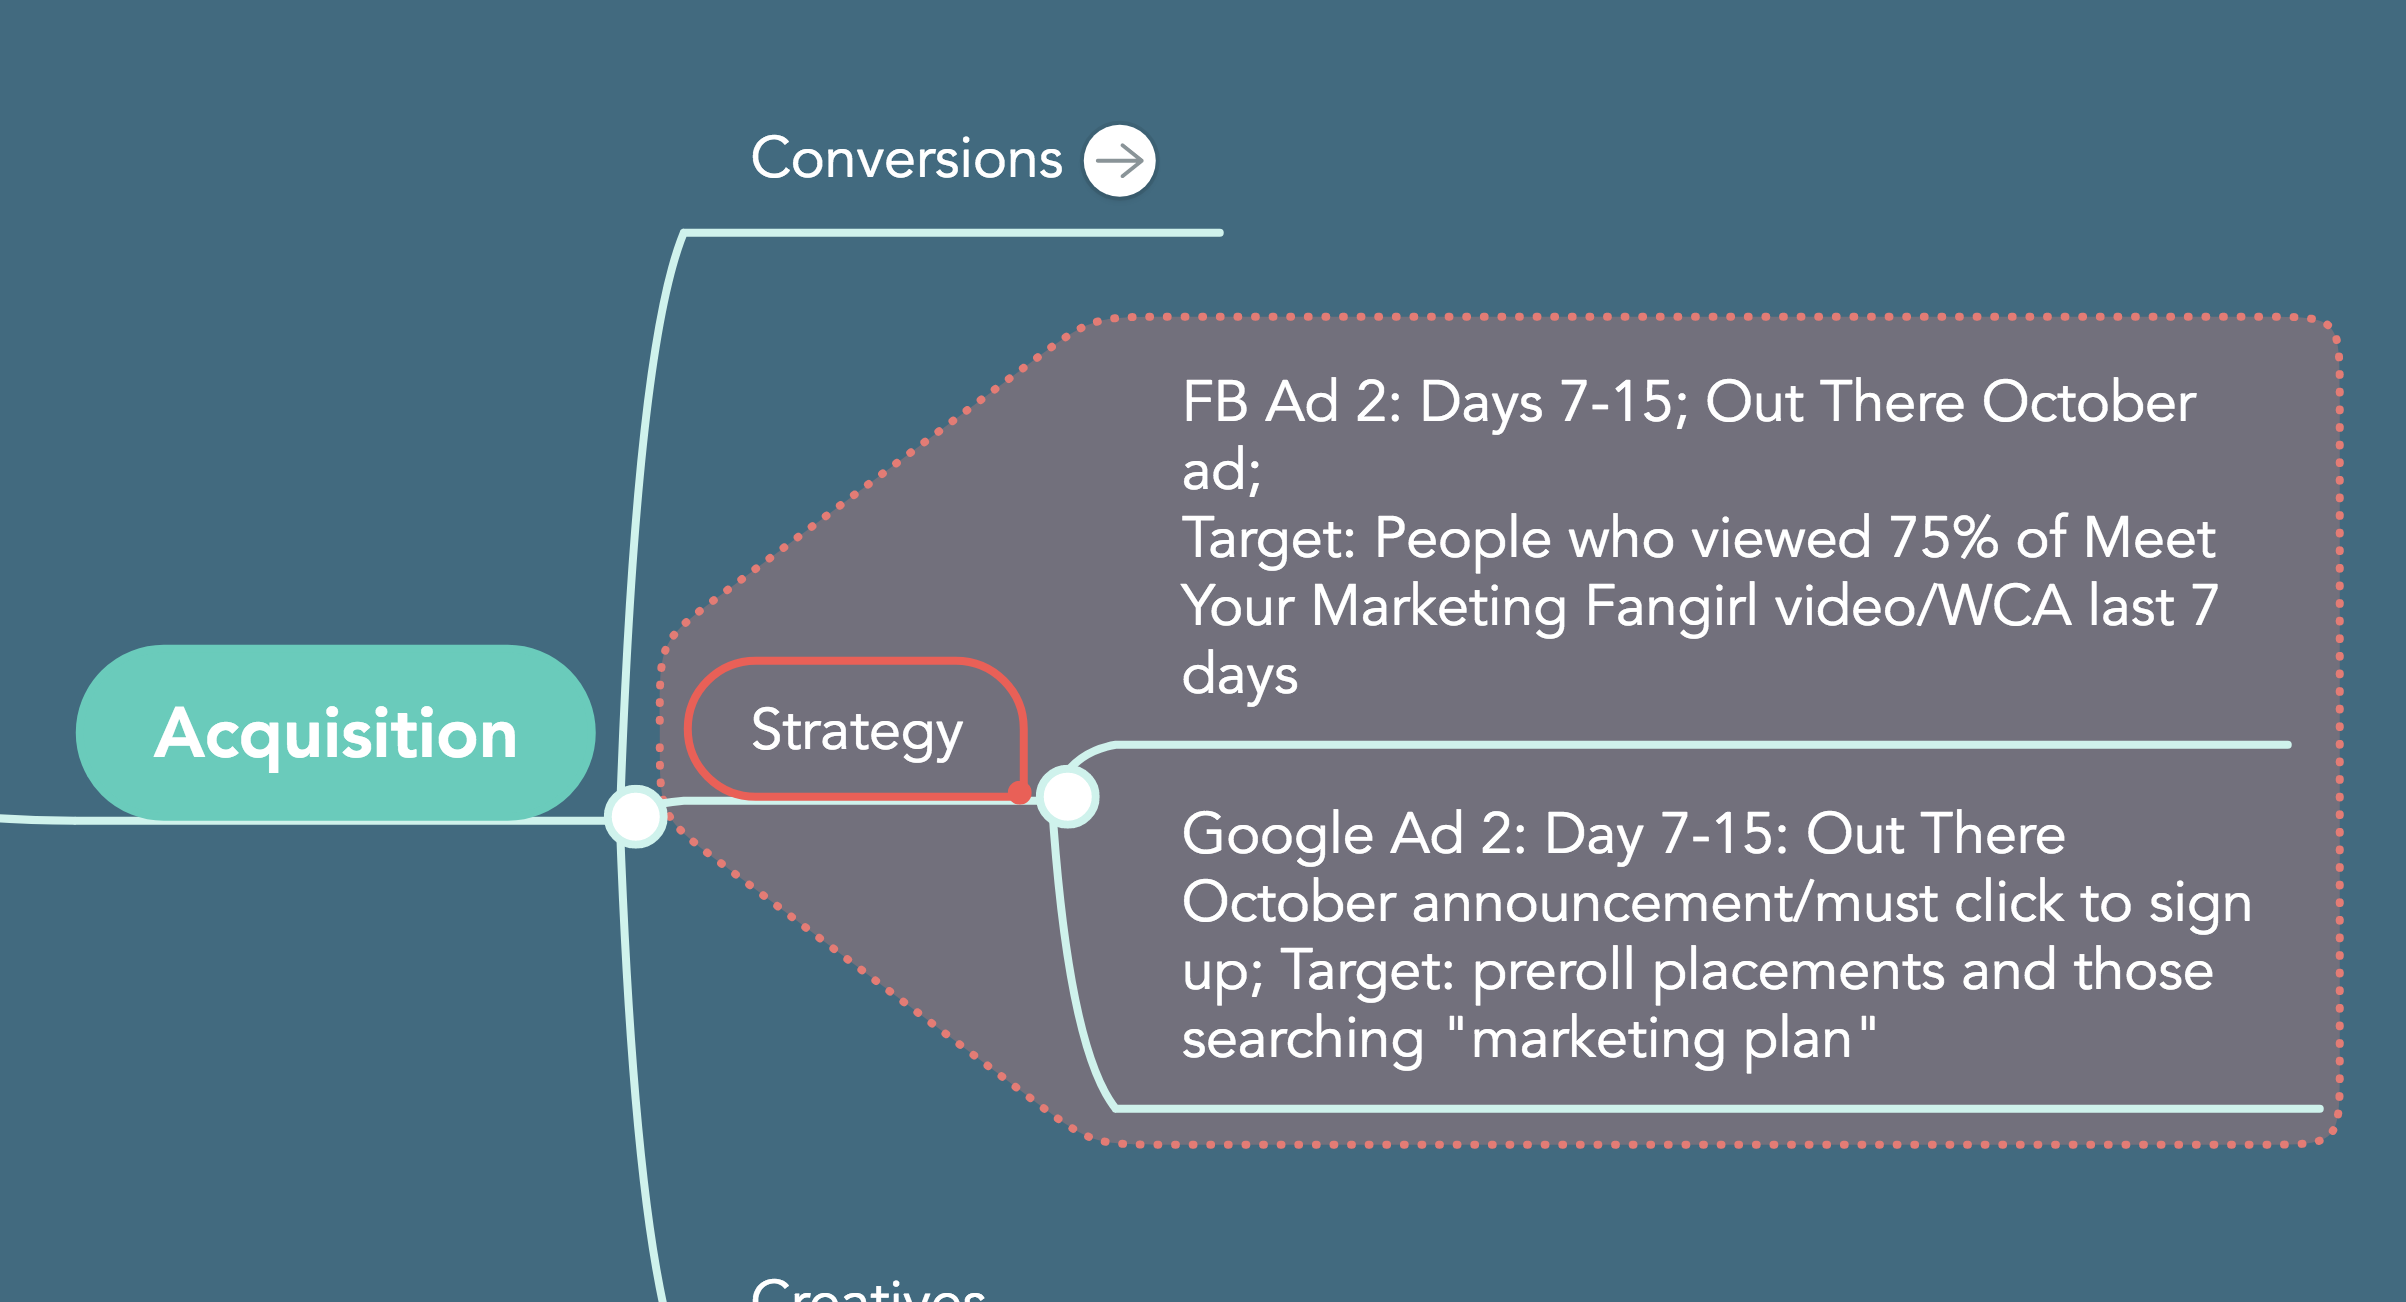 strategy acquisition customer life cycle MindMeister sales funnel facebook advertising google advertising